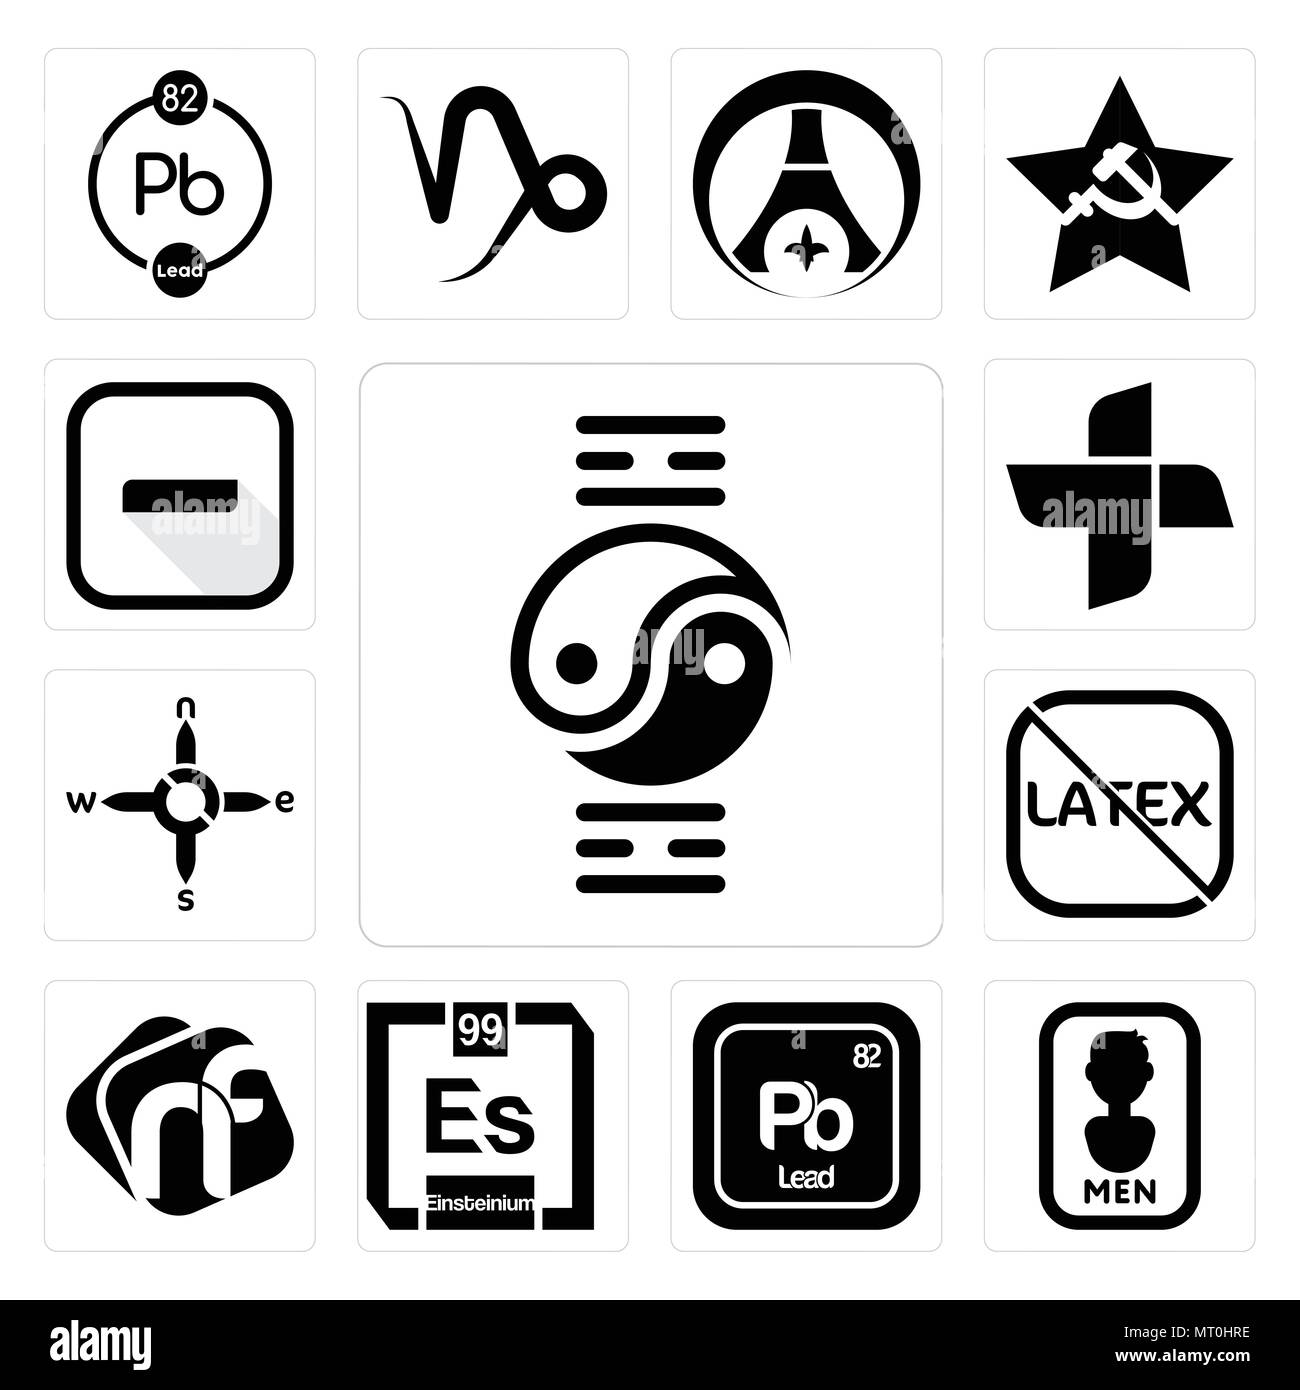 Set Of 13 simple editable icons such as qigong, mens bathroom, pb chemical, einsteinium, nf, latex free, n s e w, plus, hyphen can be used for mobile, Stock Vector